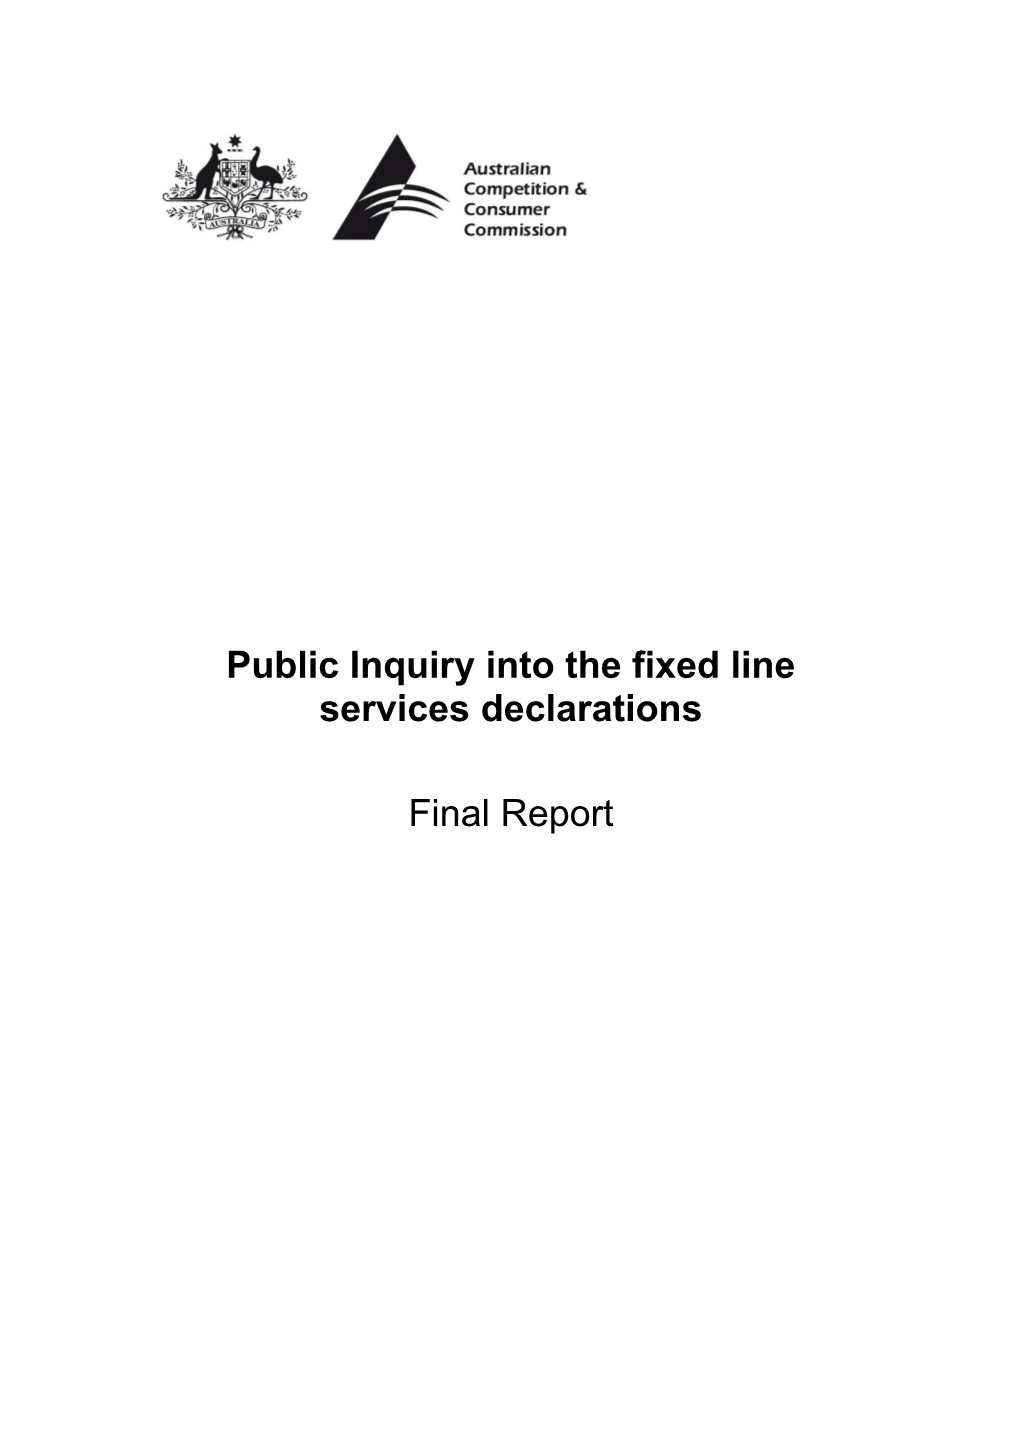 Public Inquiry Into the Fixed Line Services Declarations